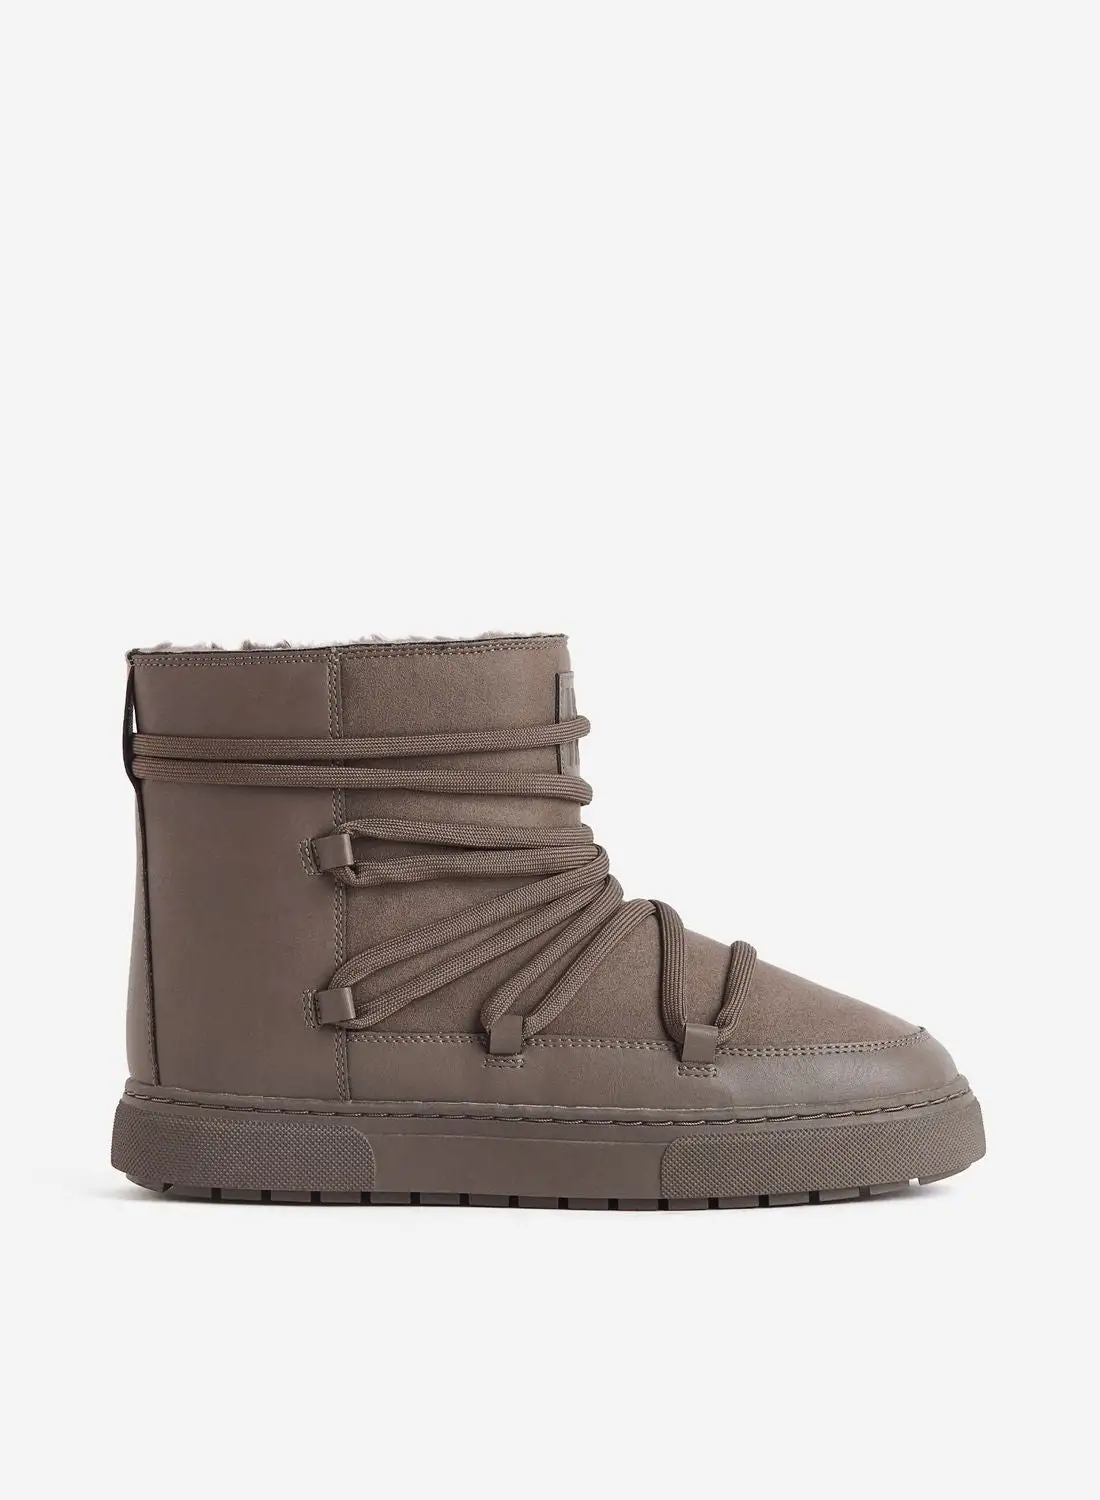 H&M Laced Padded Boots